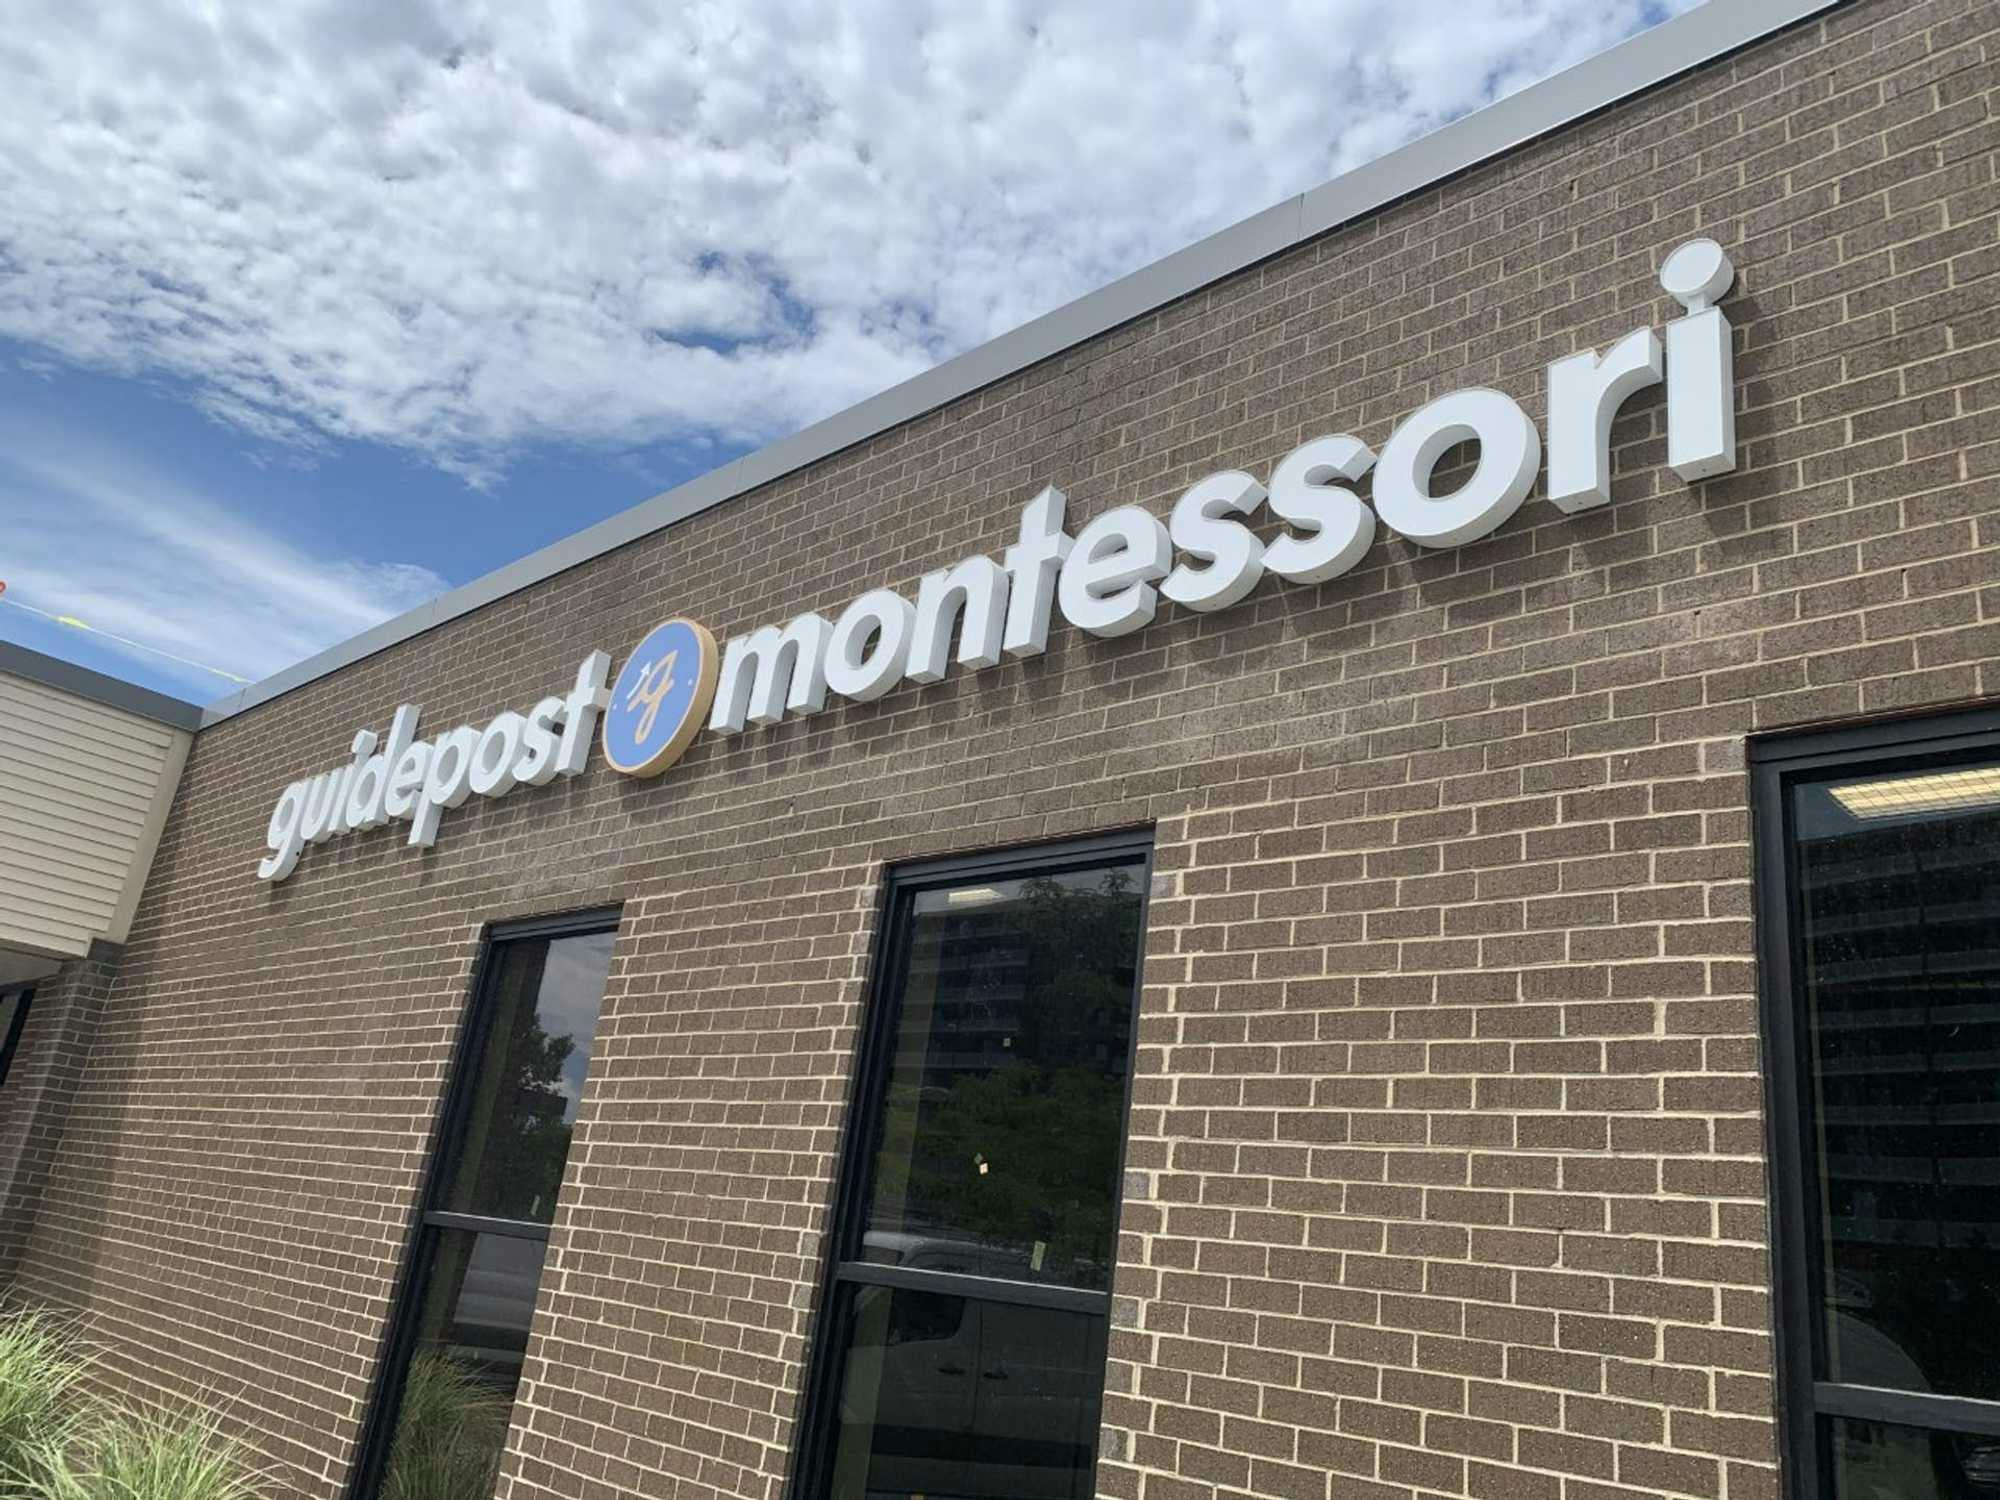 Close-Up view of Guidepost Montessori at Schaumburg that shows the brick exterior and 3 exterior windows as well as a branded Guidepost Montessori sign. Blue skies loom in the background.